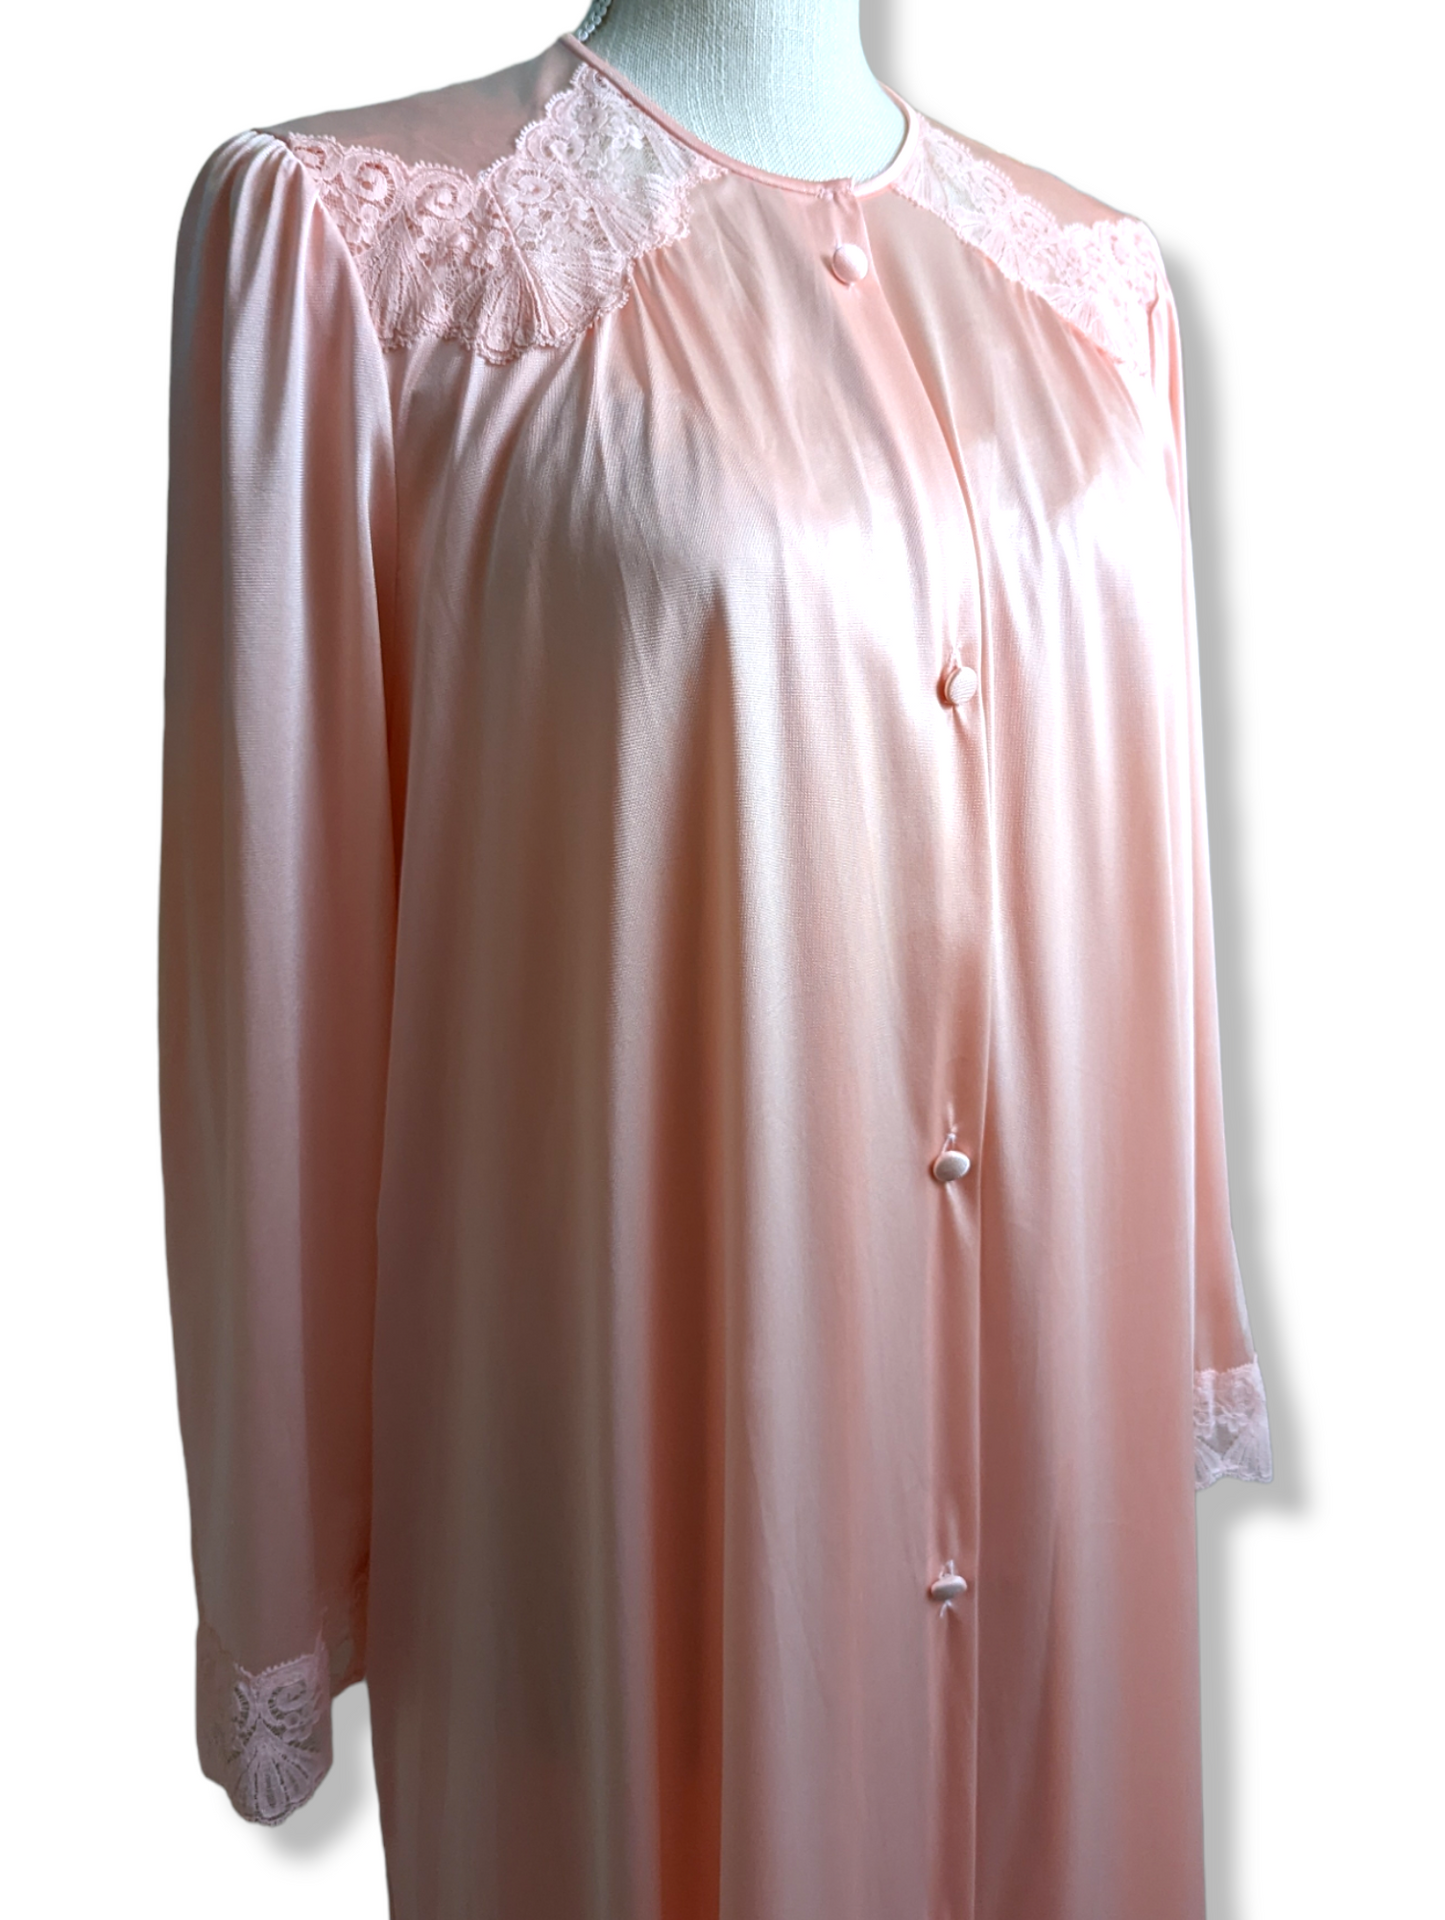 1950s Vanity Fair Pink Two Piece Peignoir and Negligee Nightgown Set